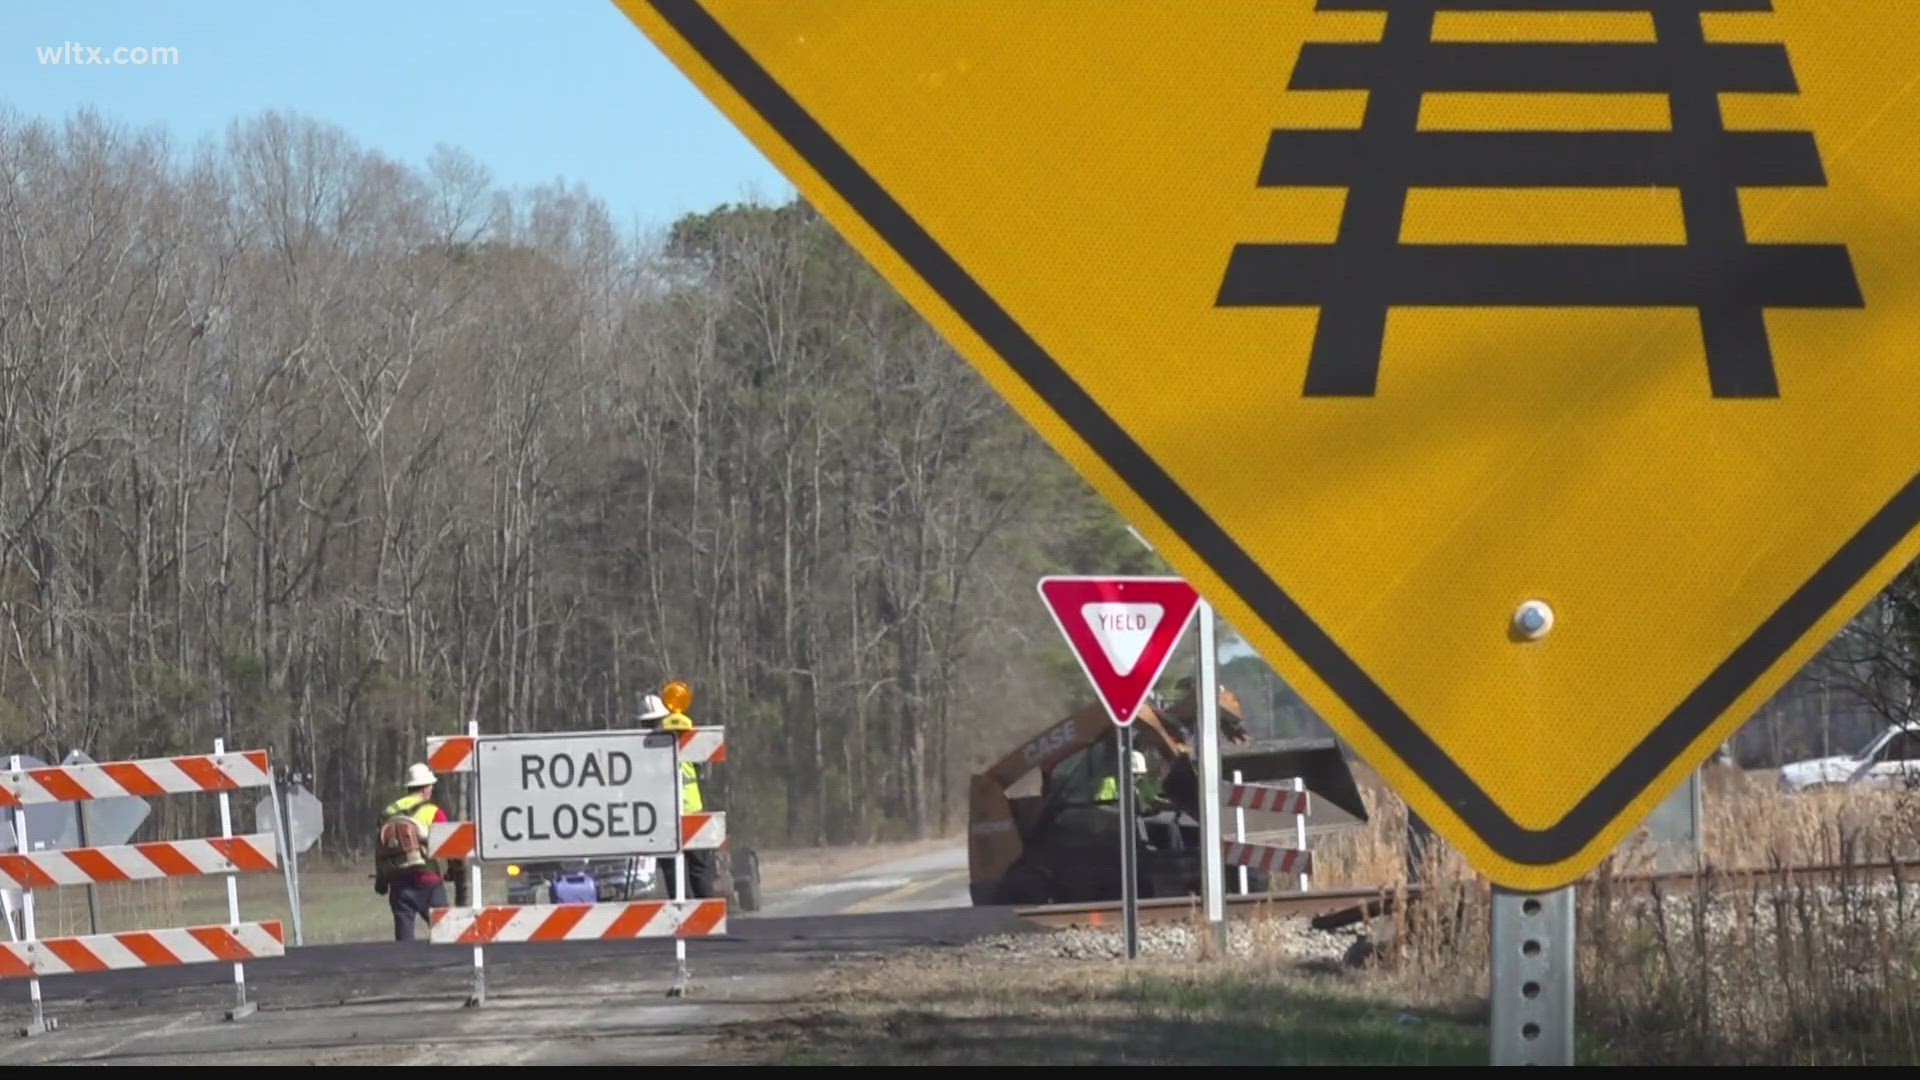 Over 60 railroad tracks will be repaired to support the structure under them, potentially impacting commutes in Richland, Lexington, and Newberry counties.